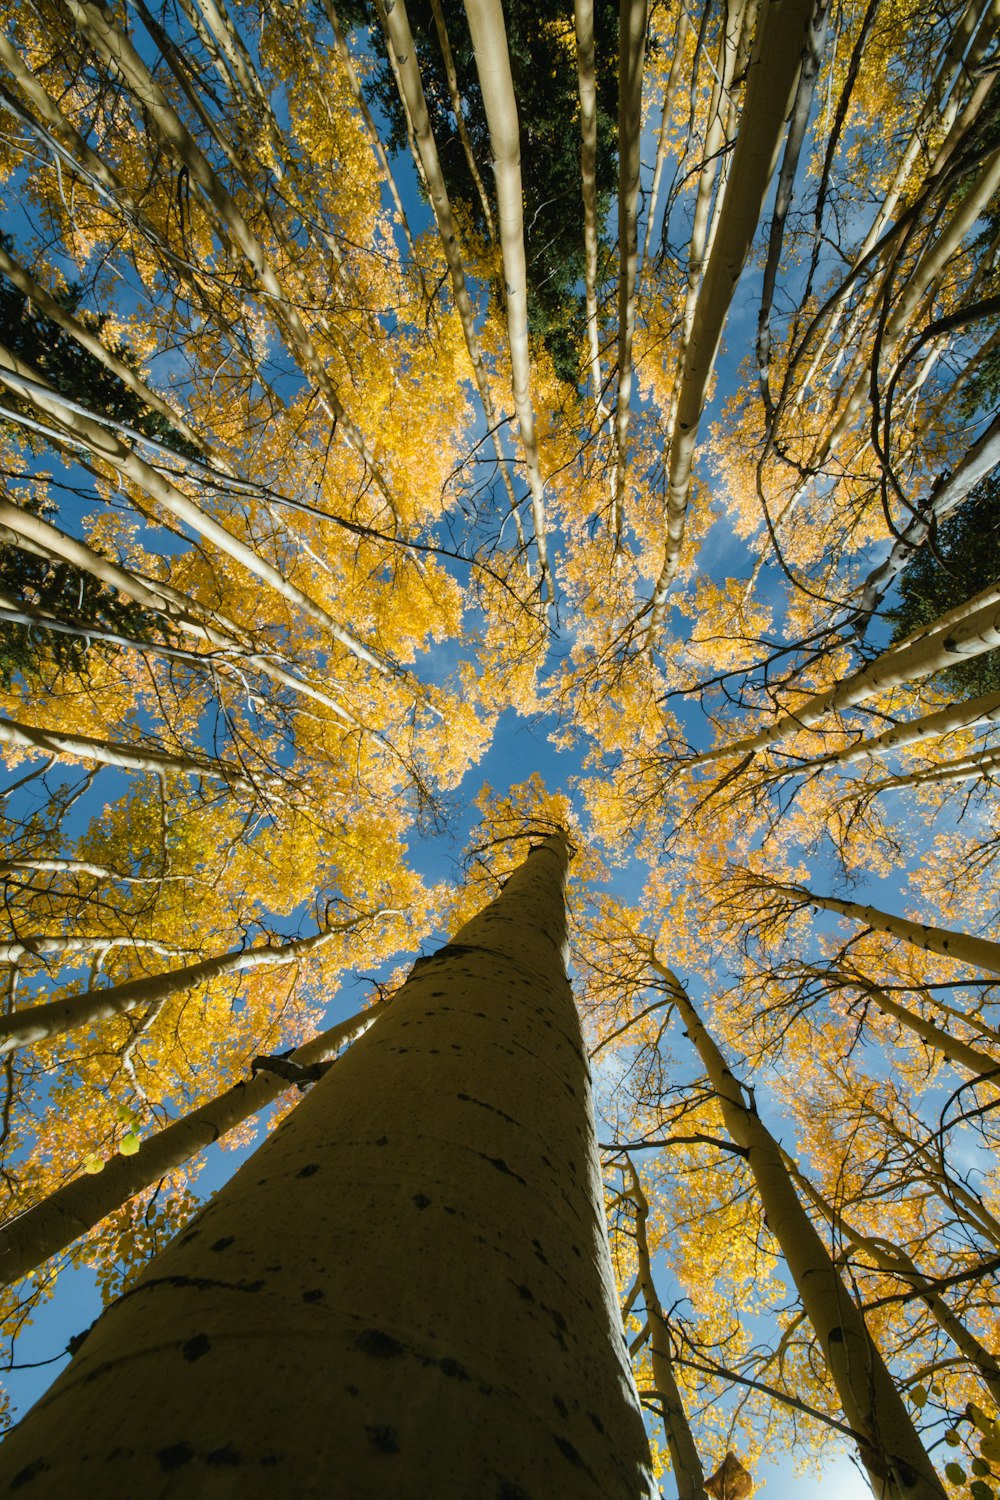 looking up at a tall tree with yellow leaves